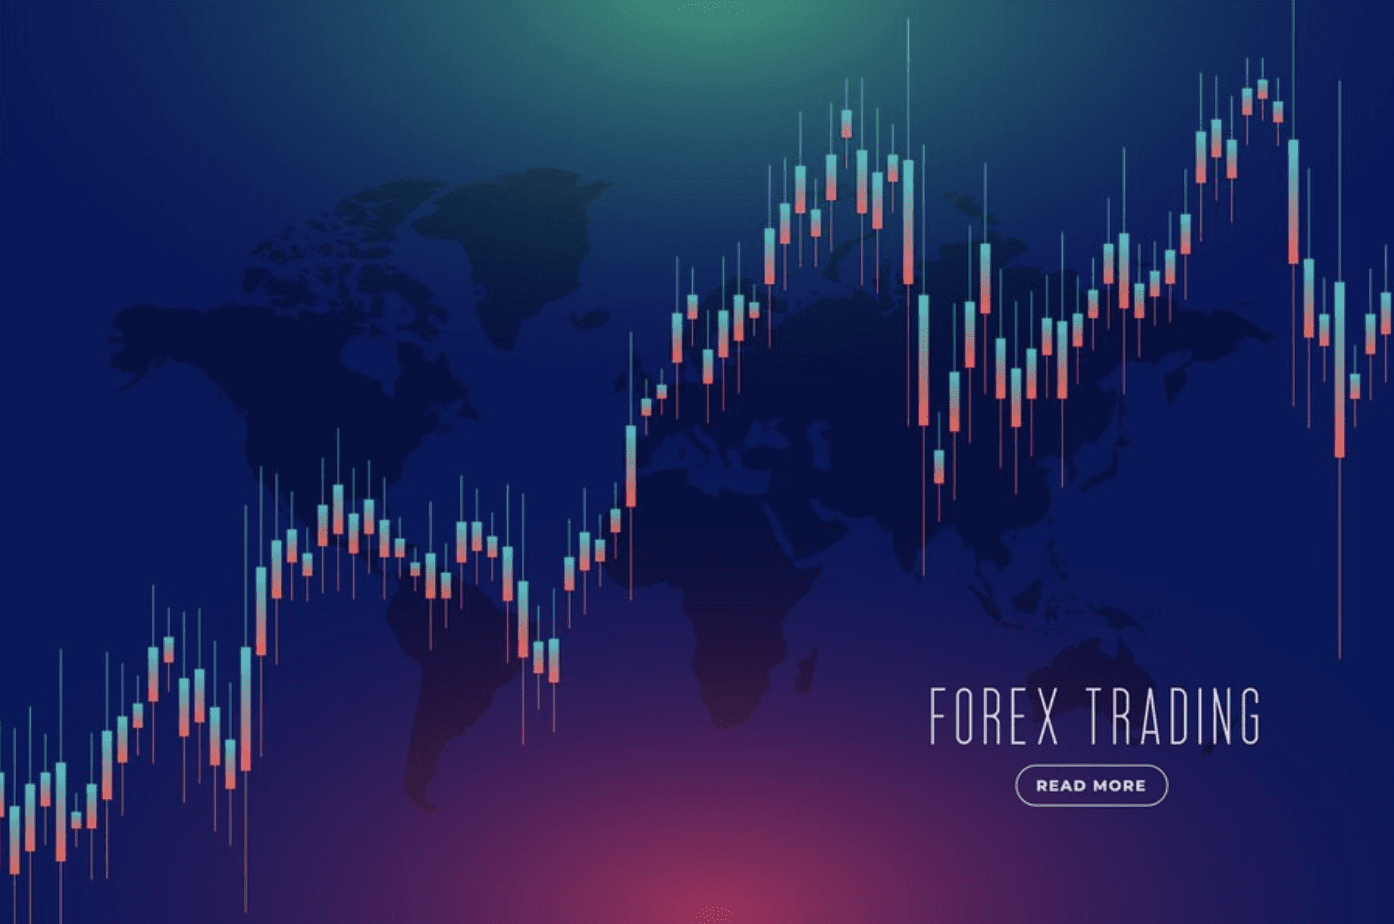 An image of a FOREX trading chart for Crypto